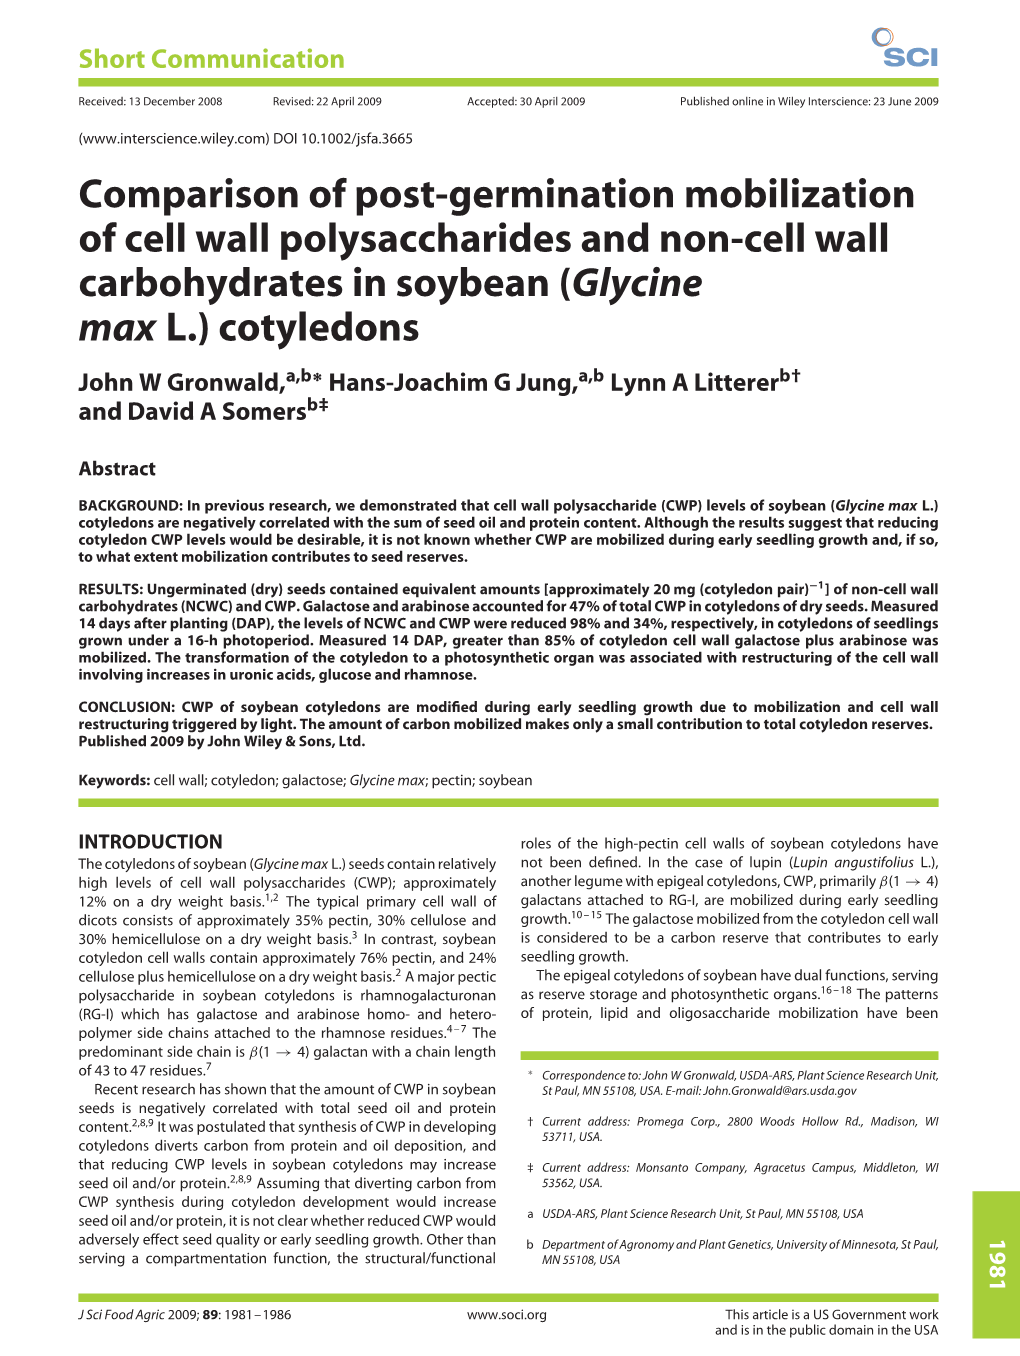 Comparison of Post-Germination Mobilization of Cell Wall